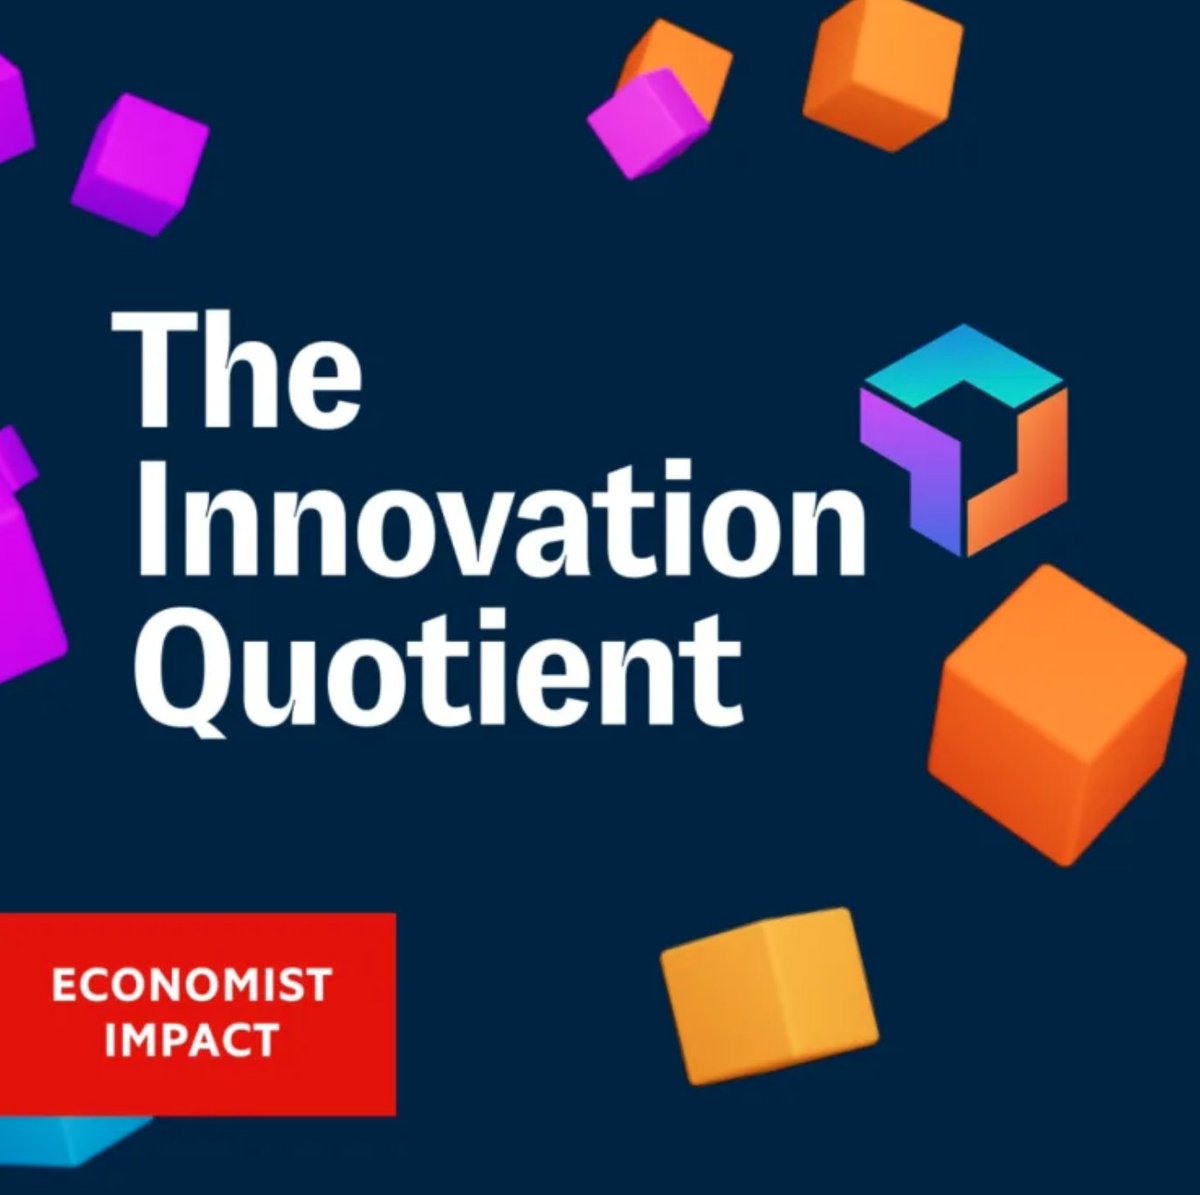 'We invest 17 times more in research and innovation than in education' @pilvitorsti shares expertise on the @economistimpact podcast, discussing with @SchleicherOECD strategies to foster #innovation in #education. Listen: shorturl.at/kBNO4 #EUROPEANYEAROFSKILLS